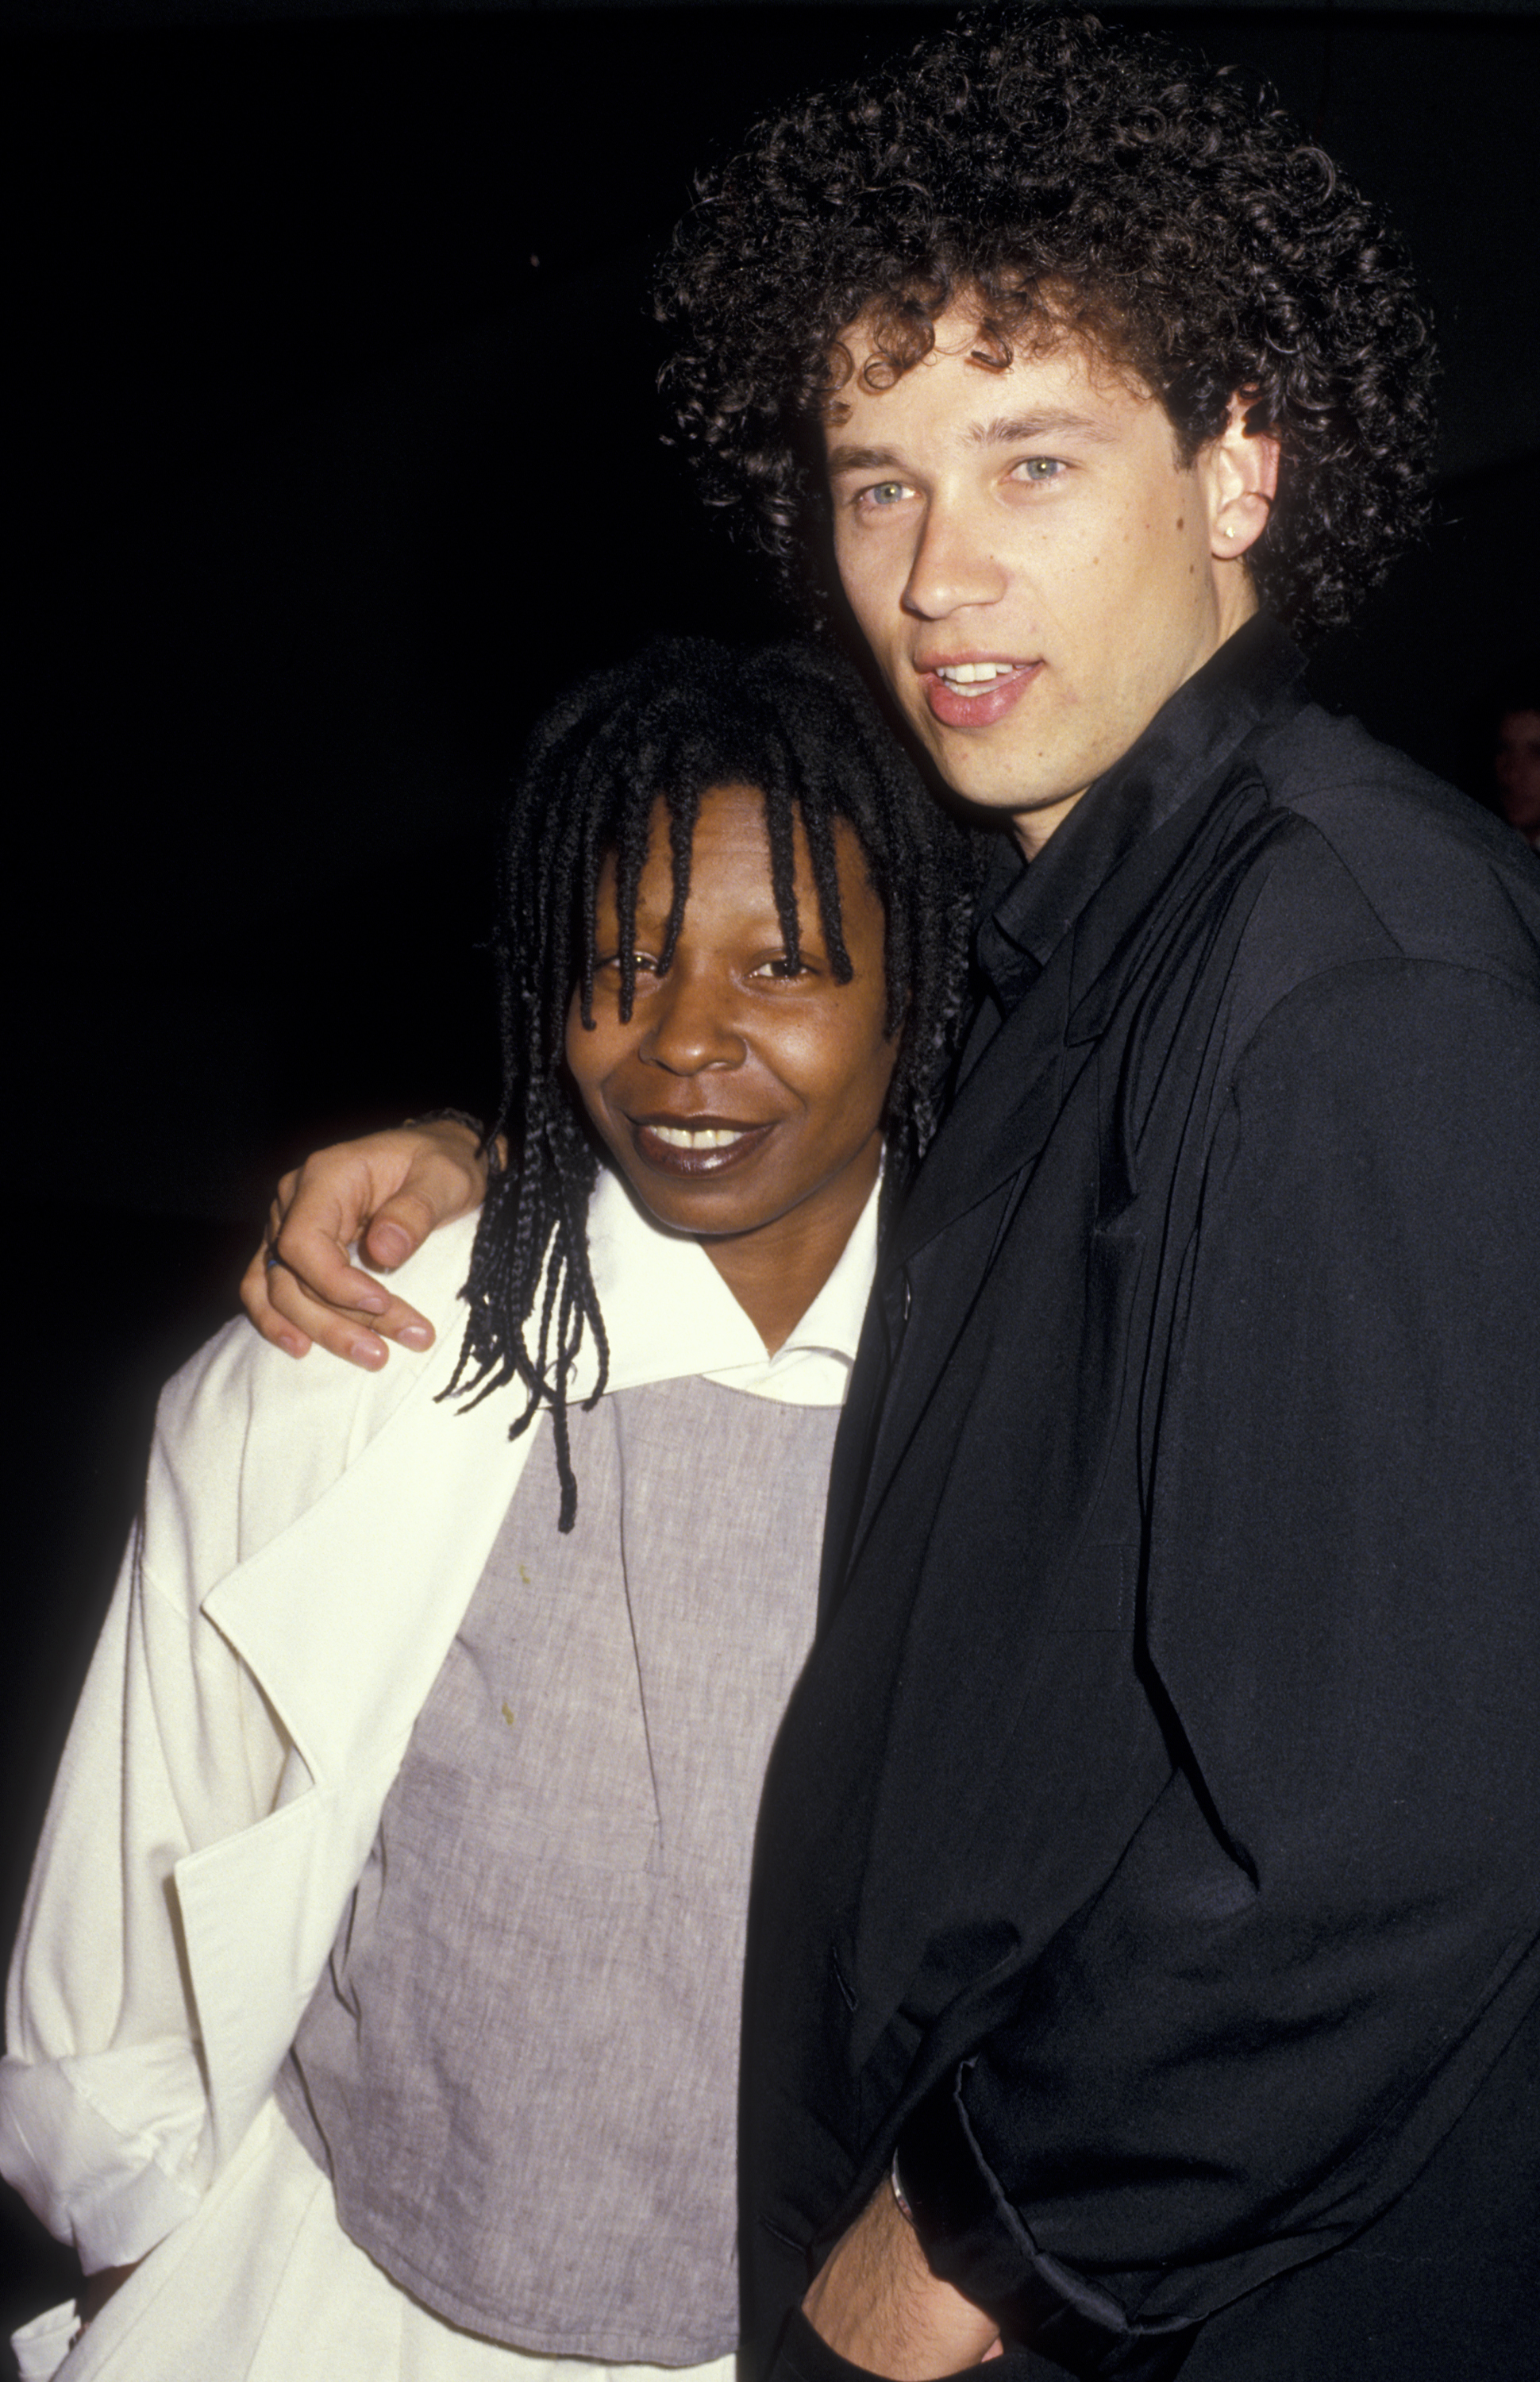 Whoopi Goldberg and David Claessen attend the "Starlight Wishes, Musical Memories, Valentine Dreams" Starlight Children's Foundation Benefit at the Bonaventure Hotel on February 14, 1987, in Los Angeles, California. | Source: Getty Images